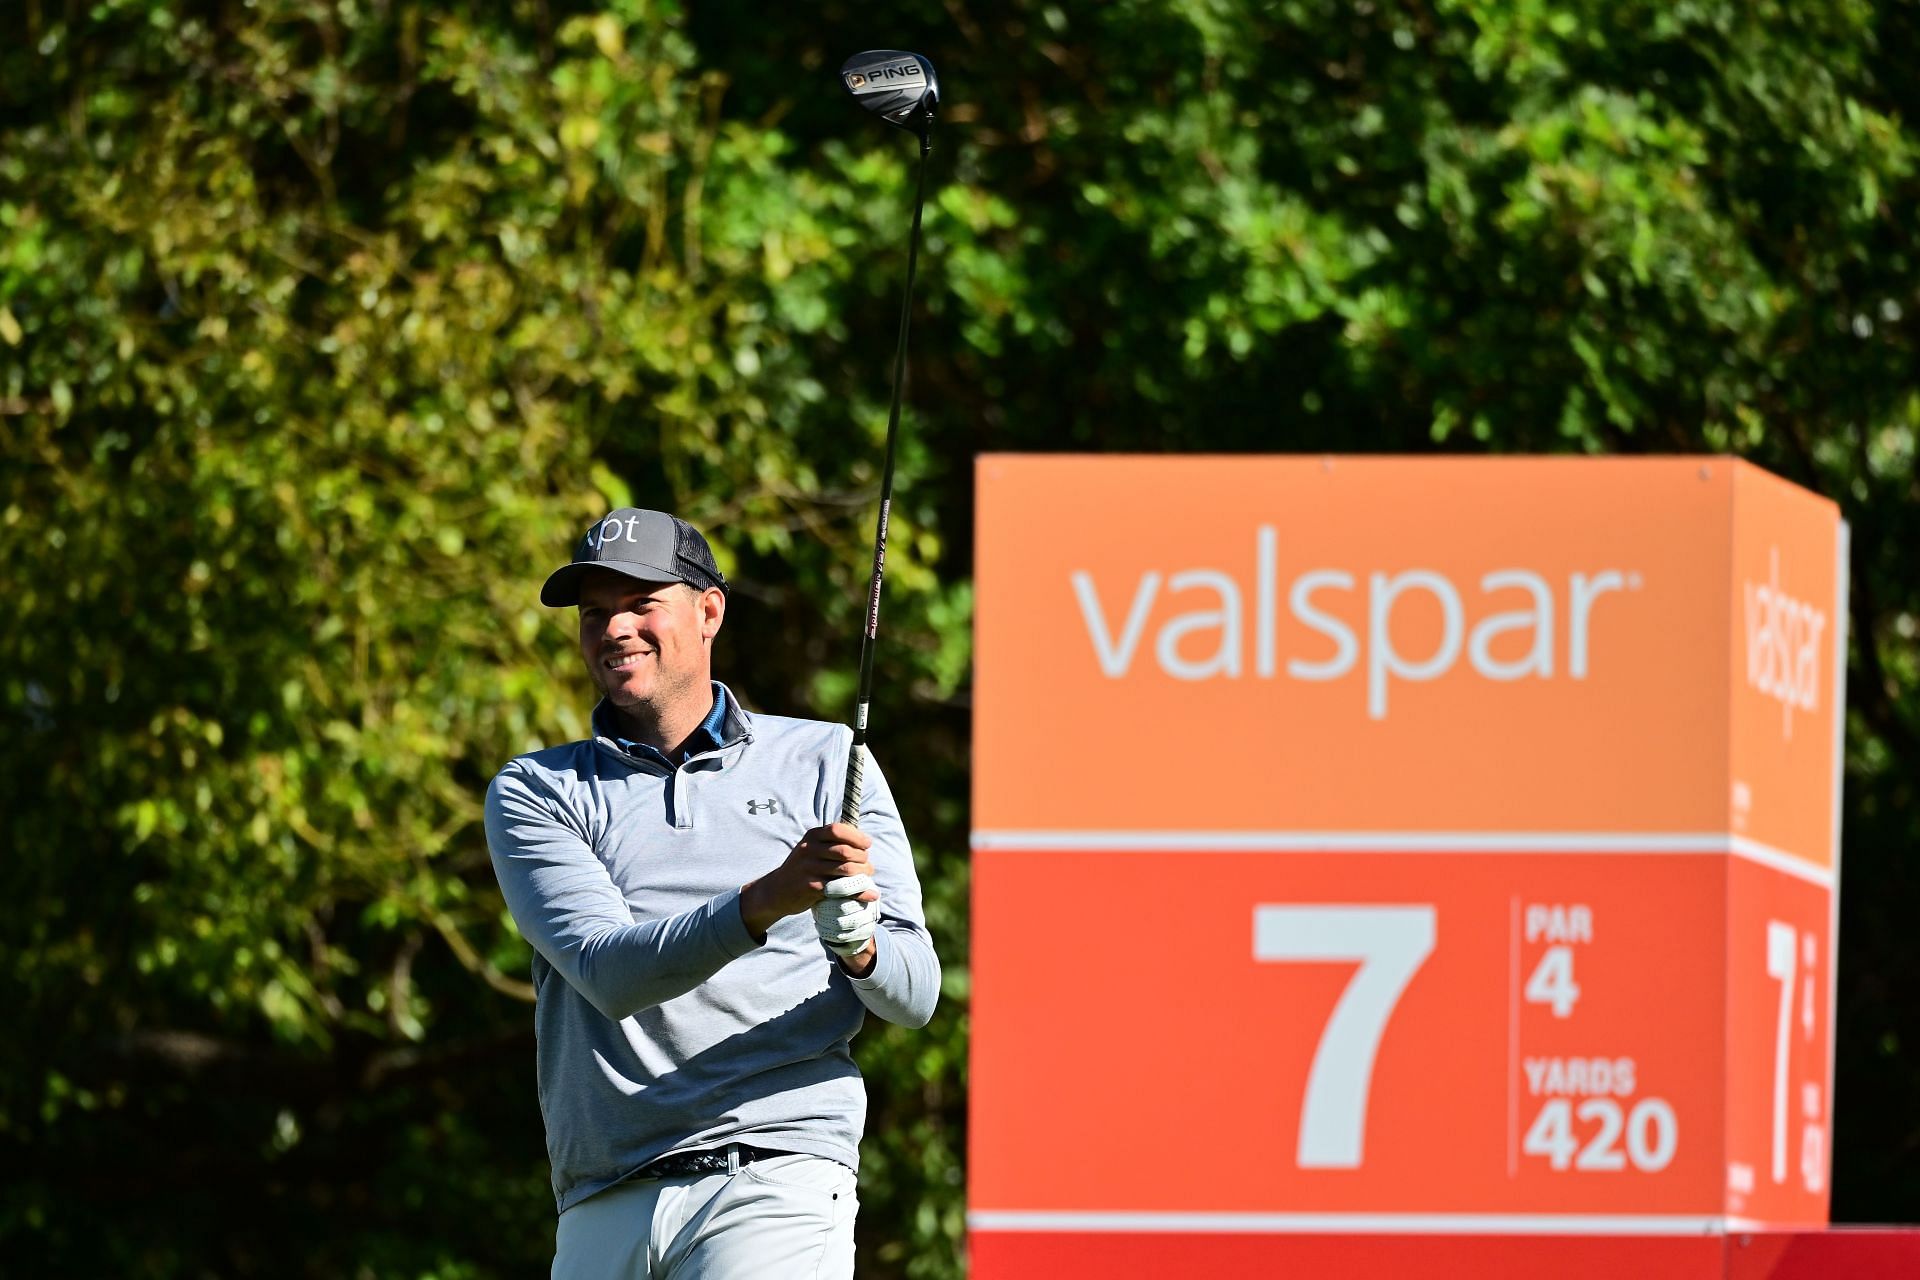 Adam Schenk leads the table at the Valspar Championship after two rounds